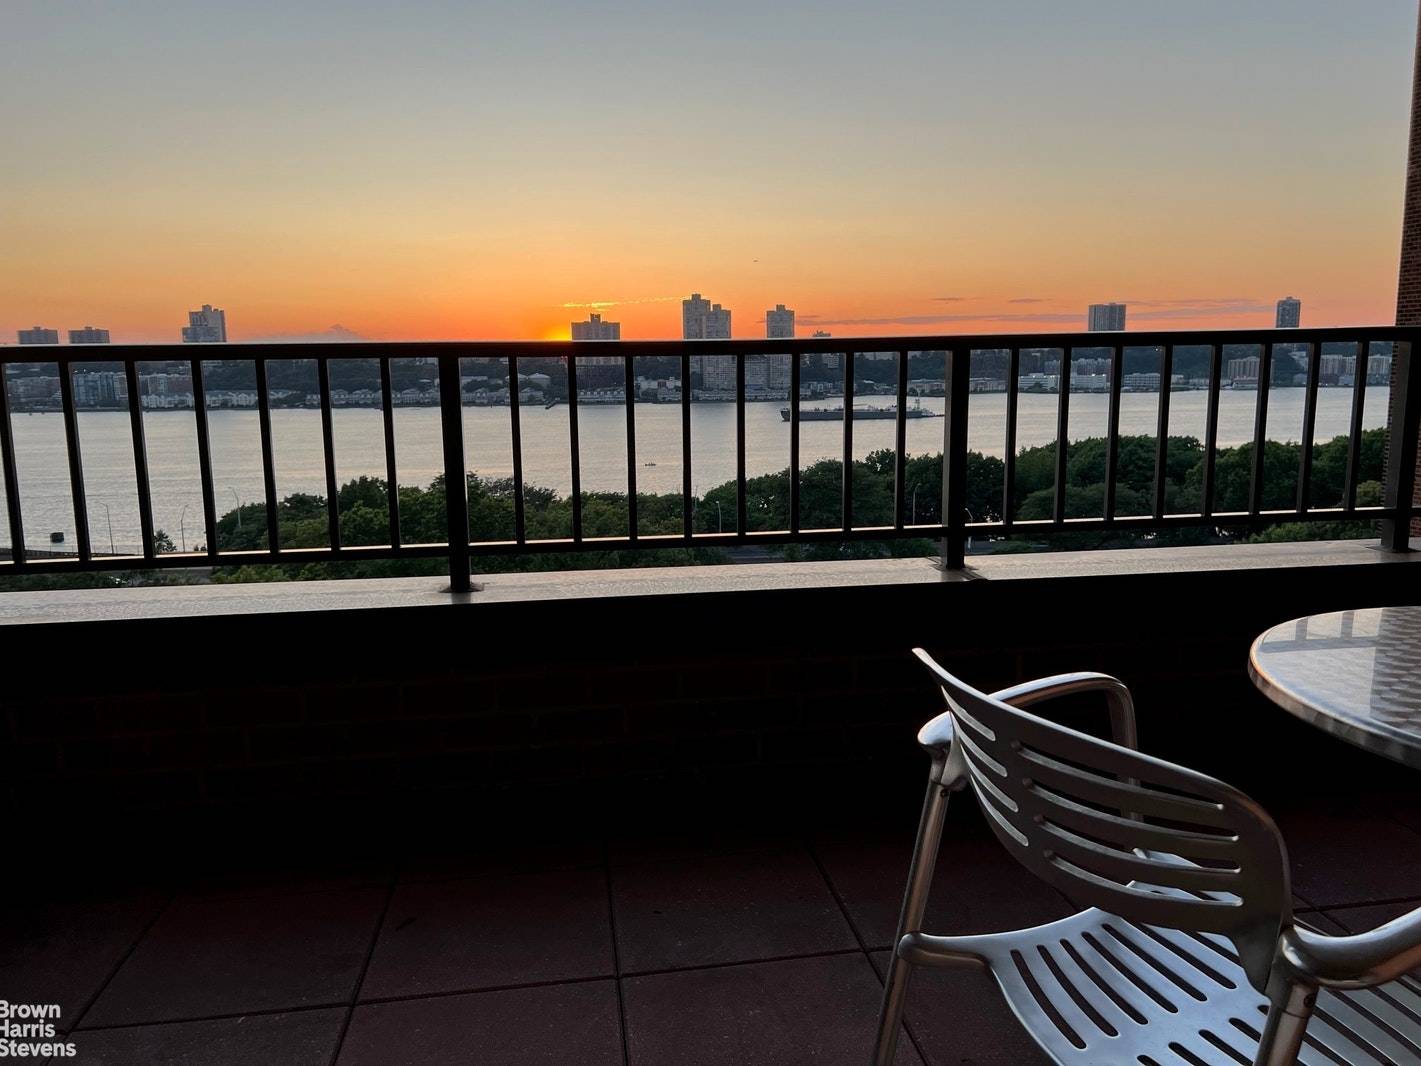 Relax outdoors, dine al fresco, watch the boats sail by and enjoy mesmerizing sunsets all from your private balcony overlooking Riverside Park and the Hudson River !